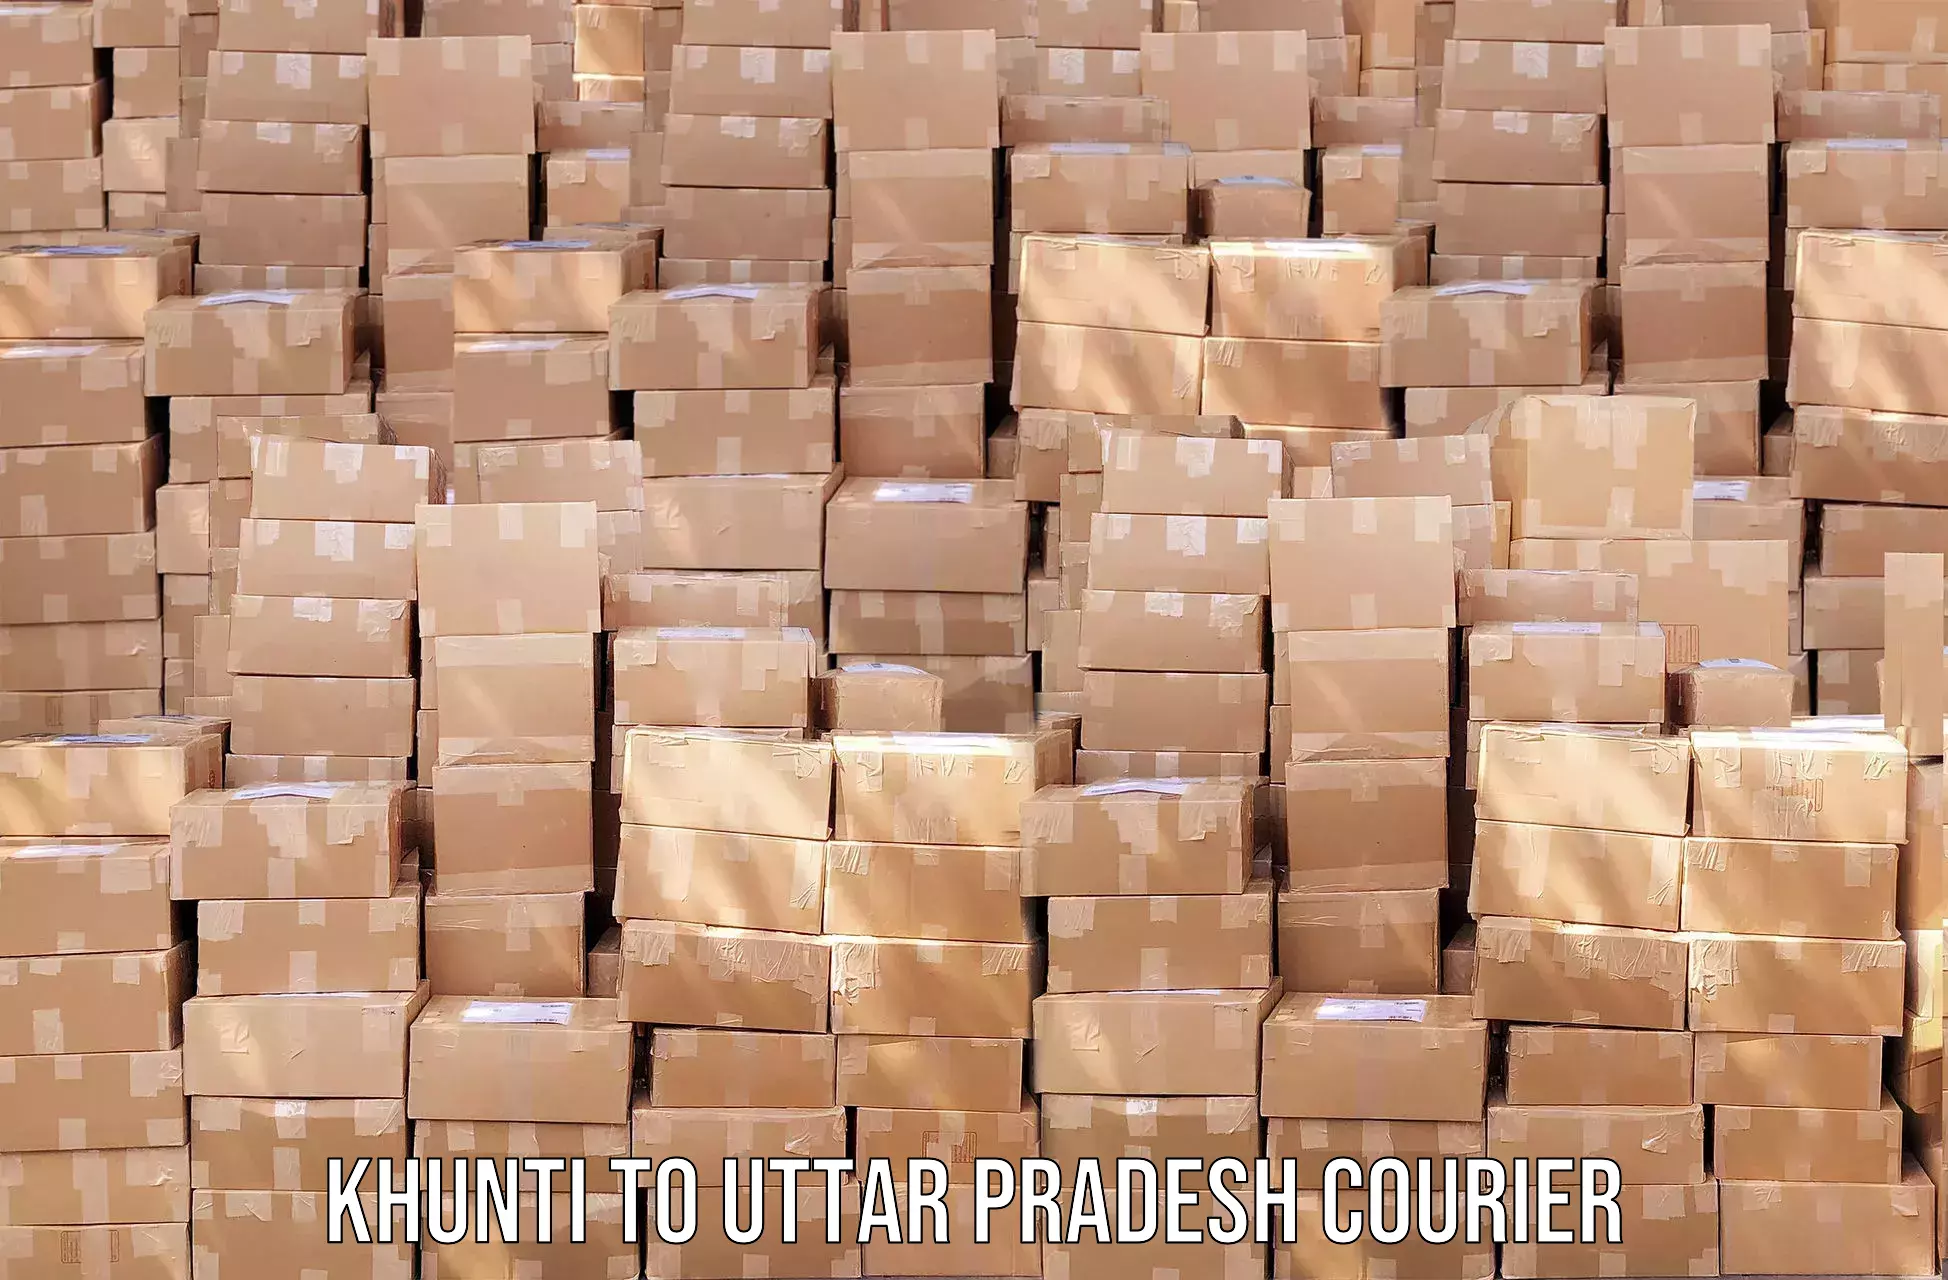 High-quality delivery services Khunti to Khair